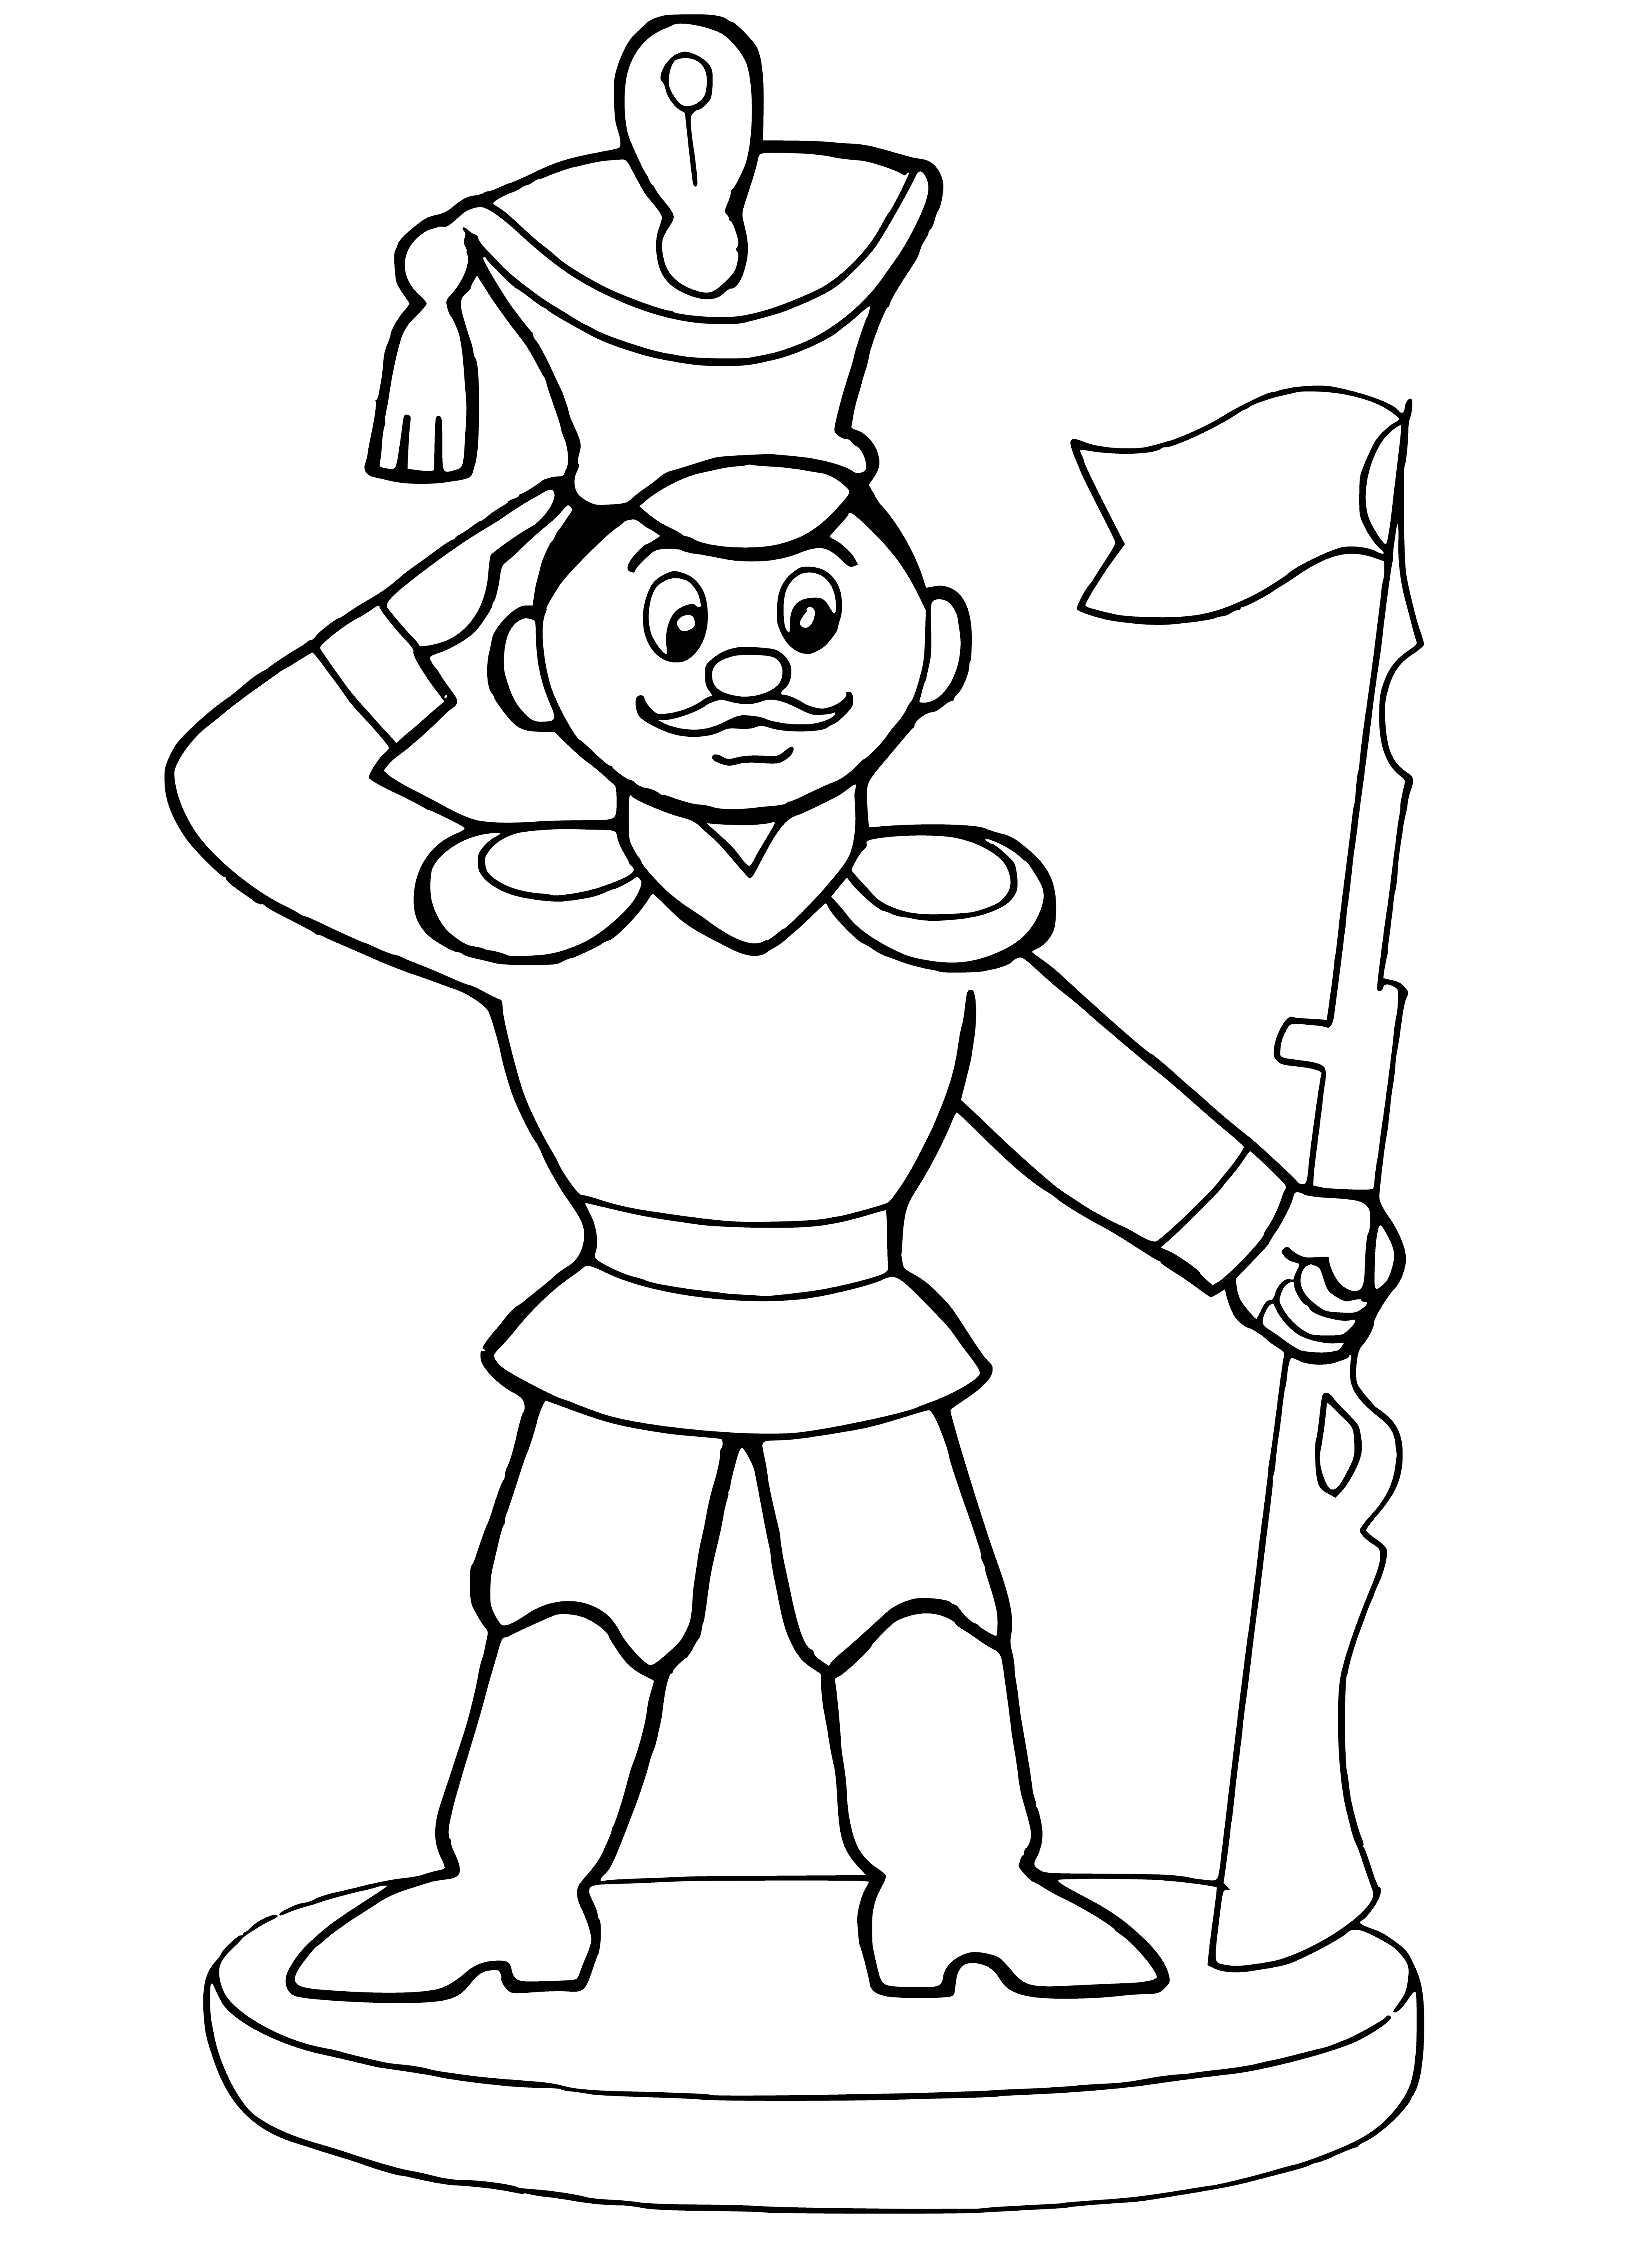 coloring page: #140char:Two toy soldiers in different uniforms holding guns stand facing the viewer in a coloring page.